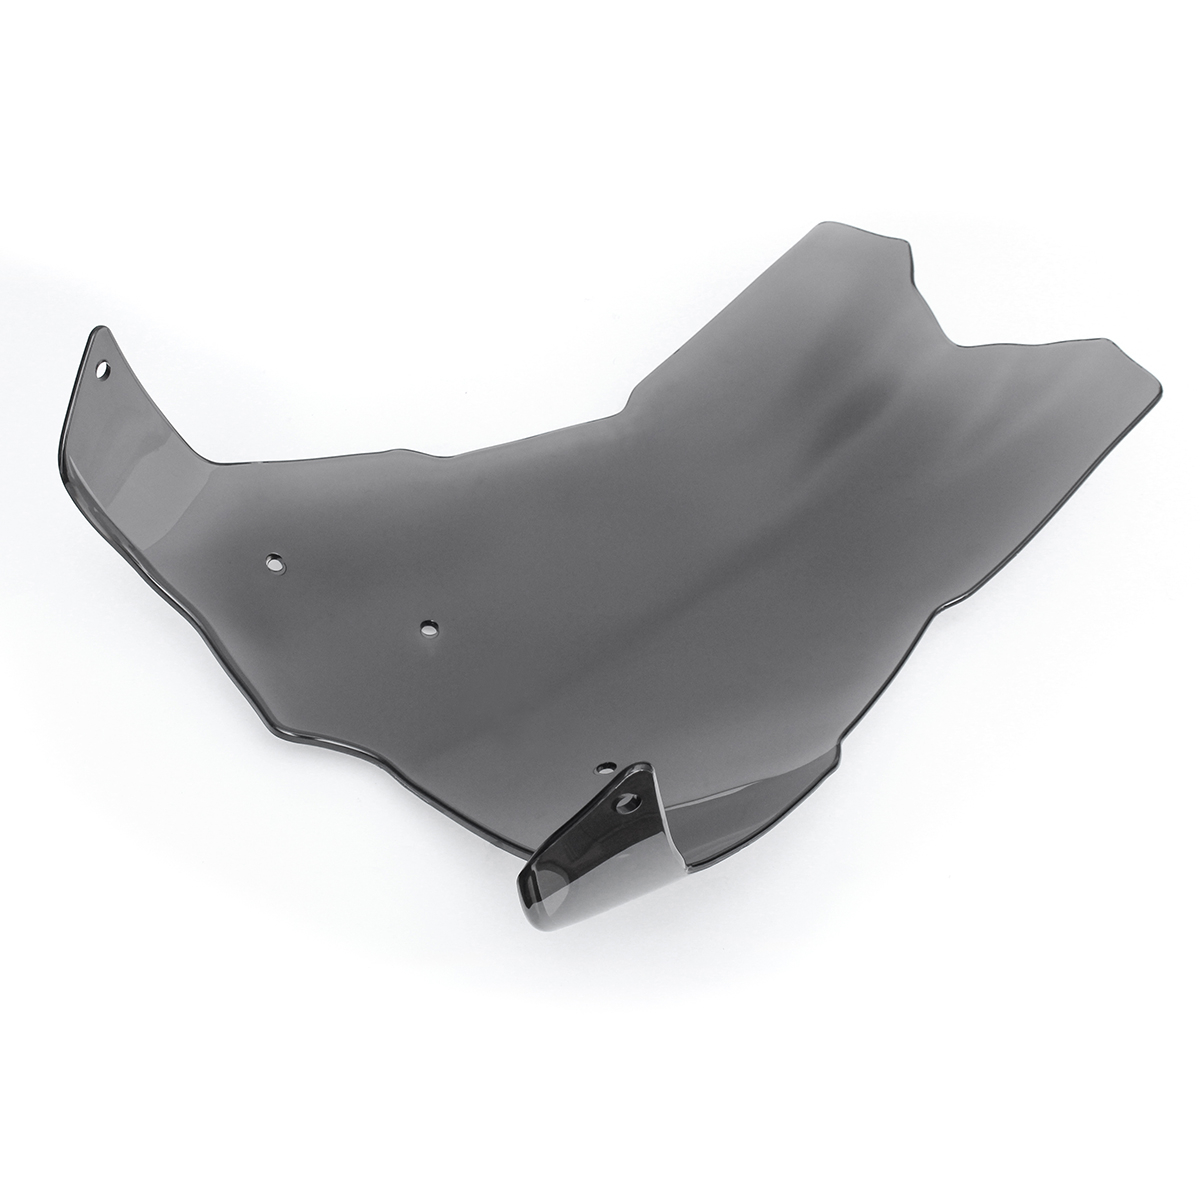 Motorcycle Windshield Windscreen Fairing Part for BMW F800GS F650GS 08-16